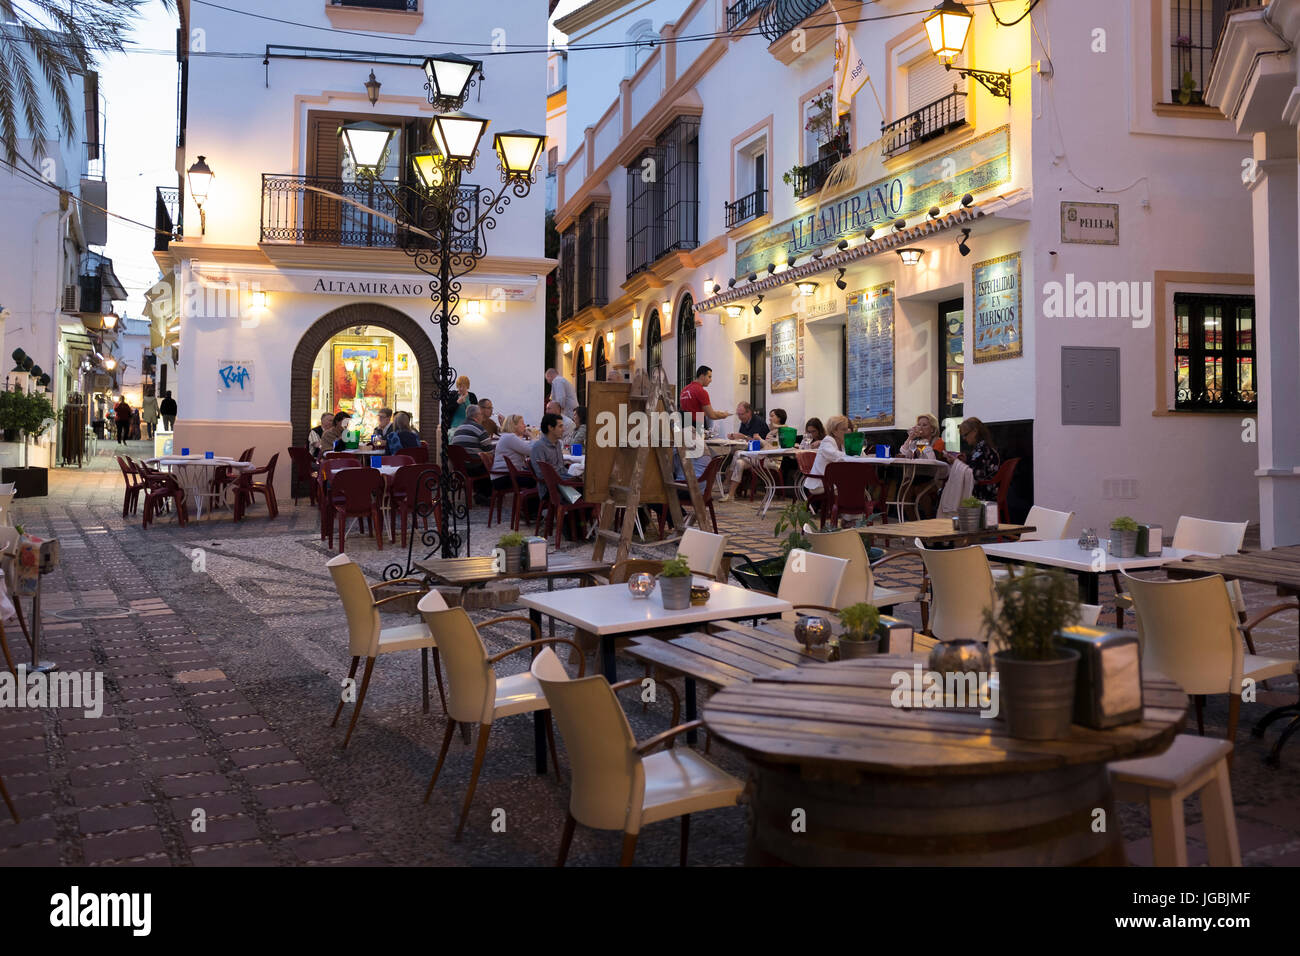 Restaurants in the small square of Calle Mendoza on a late spring evening in Marbella, Spain. Stock Photo